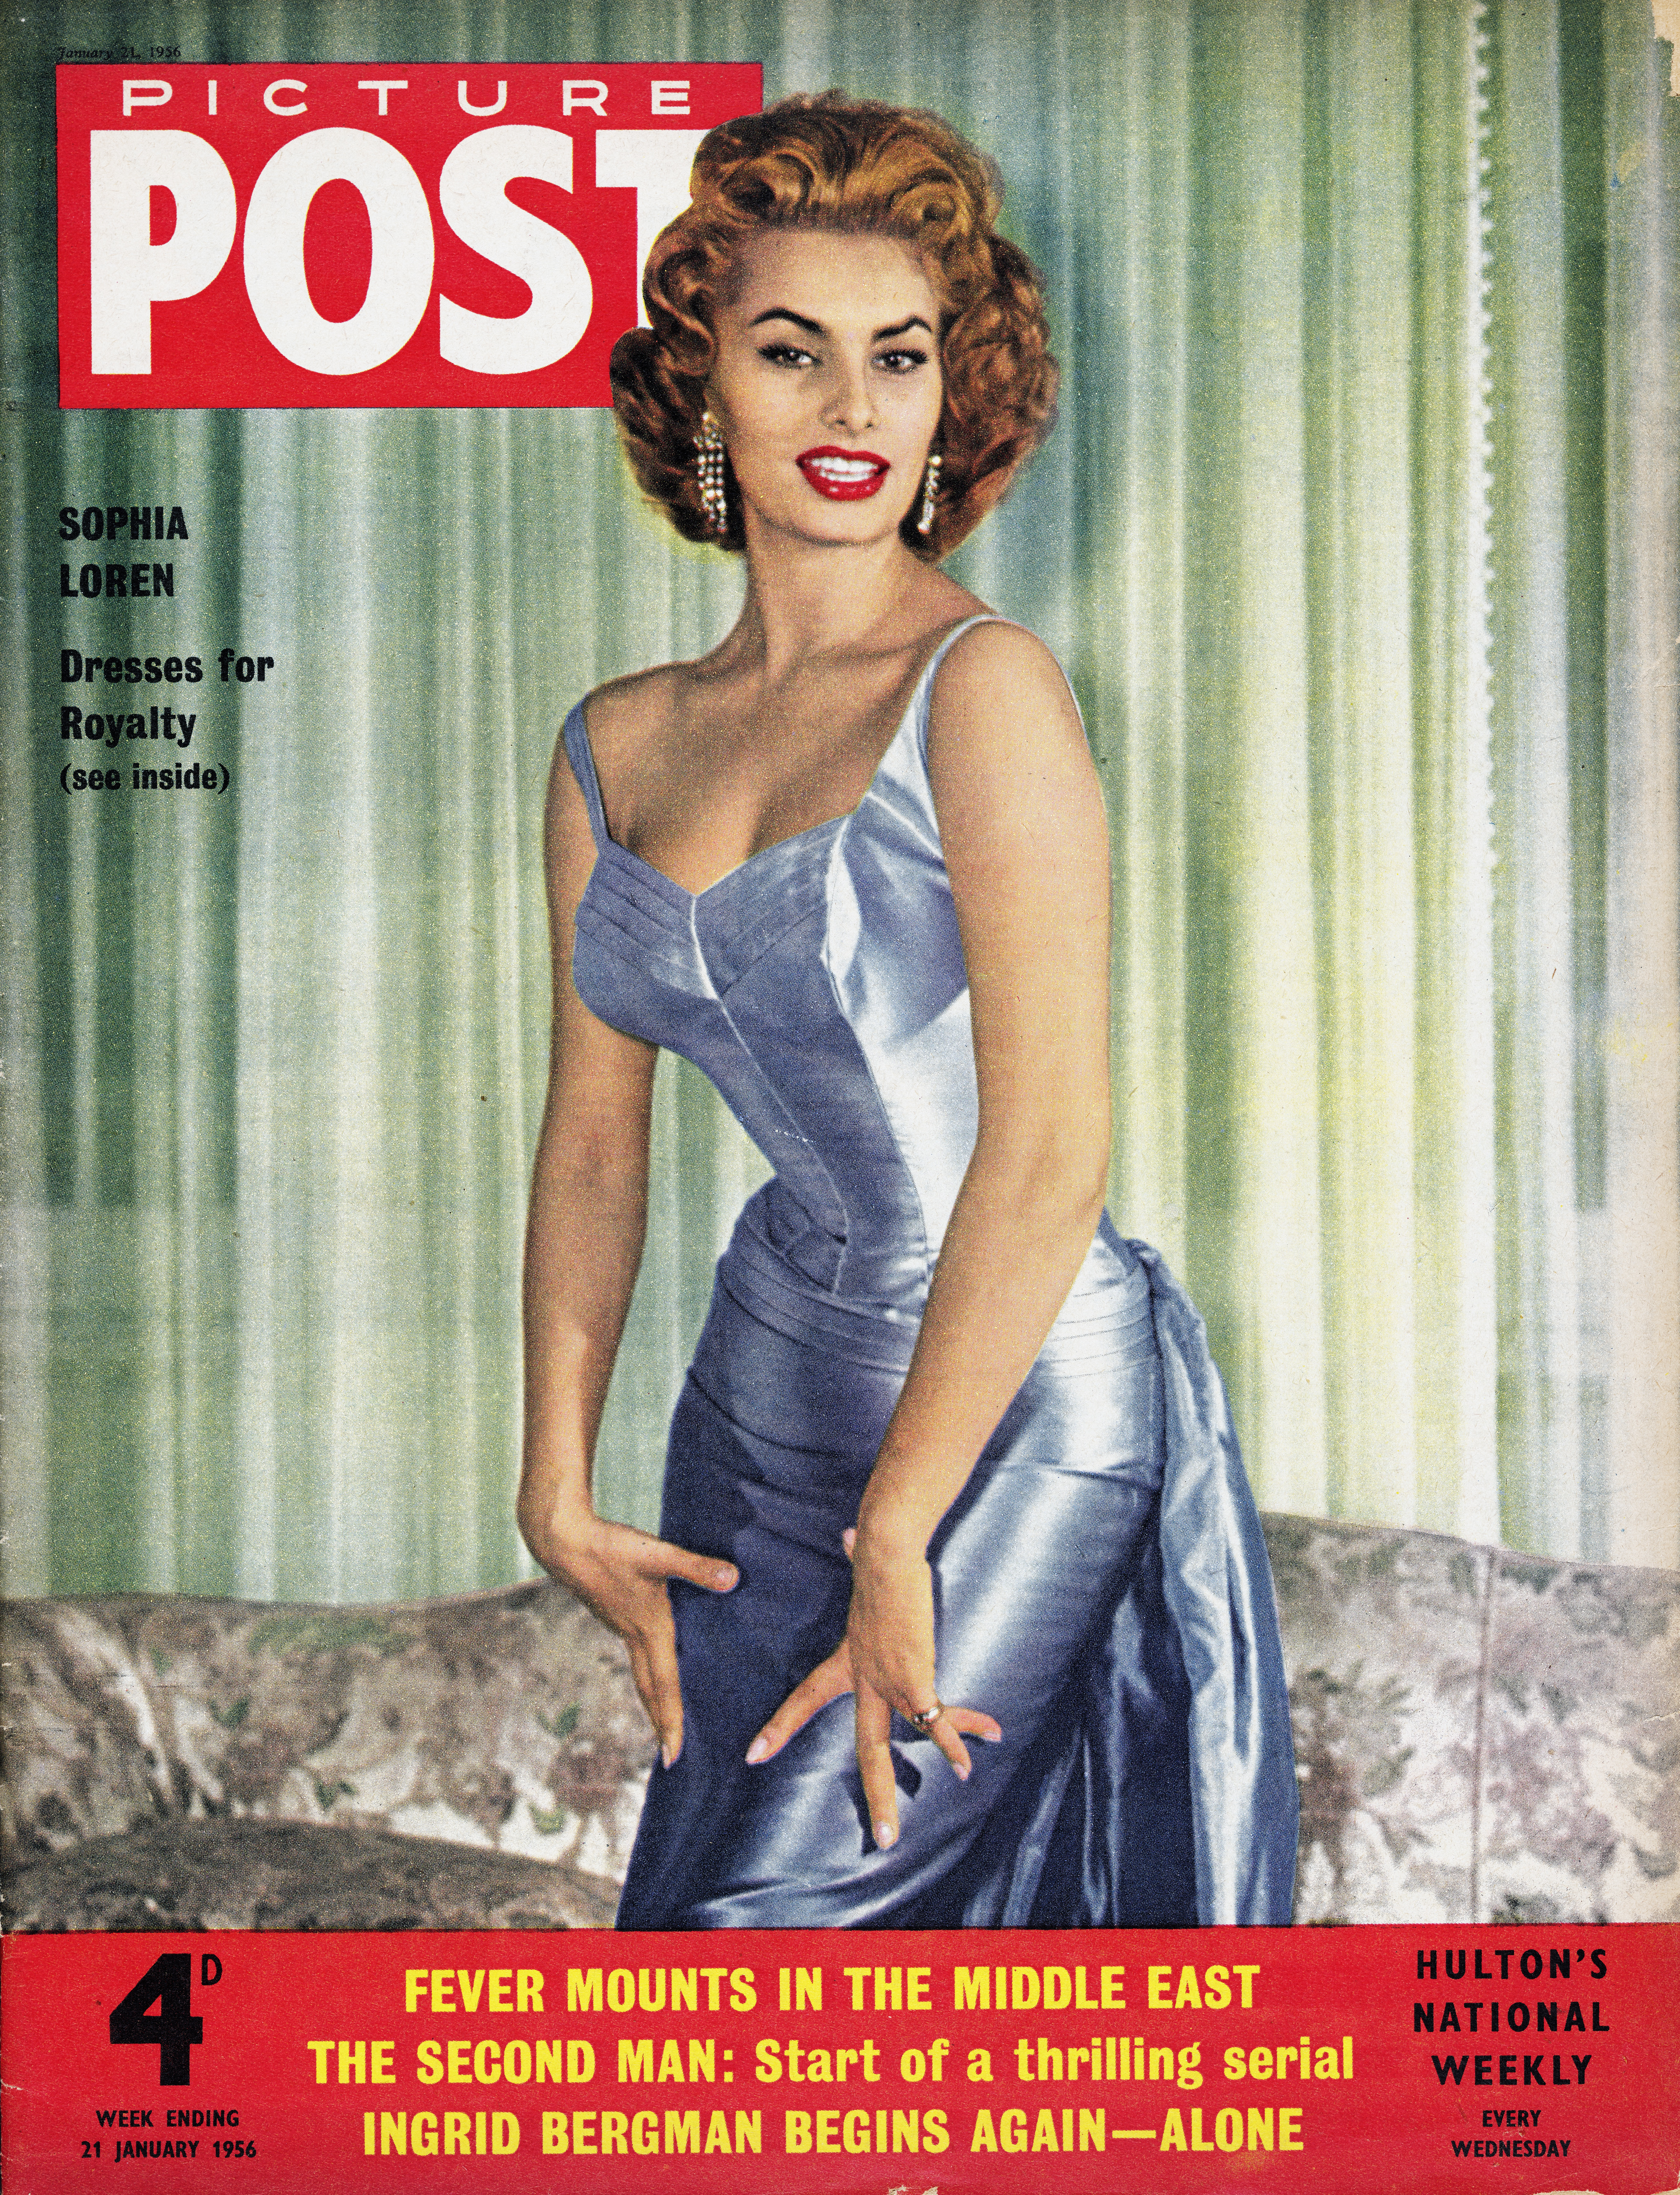 Sophia Loren on the cover of Picture Post magazine in 1956 | Source: Getty Images